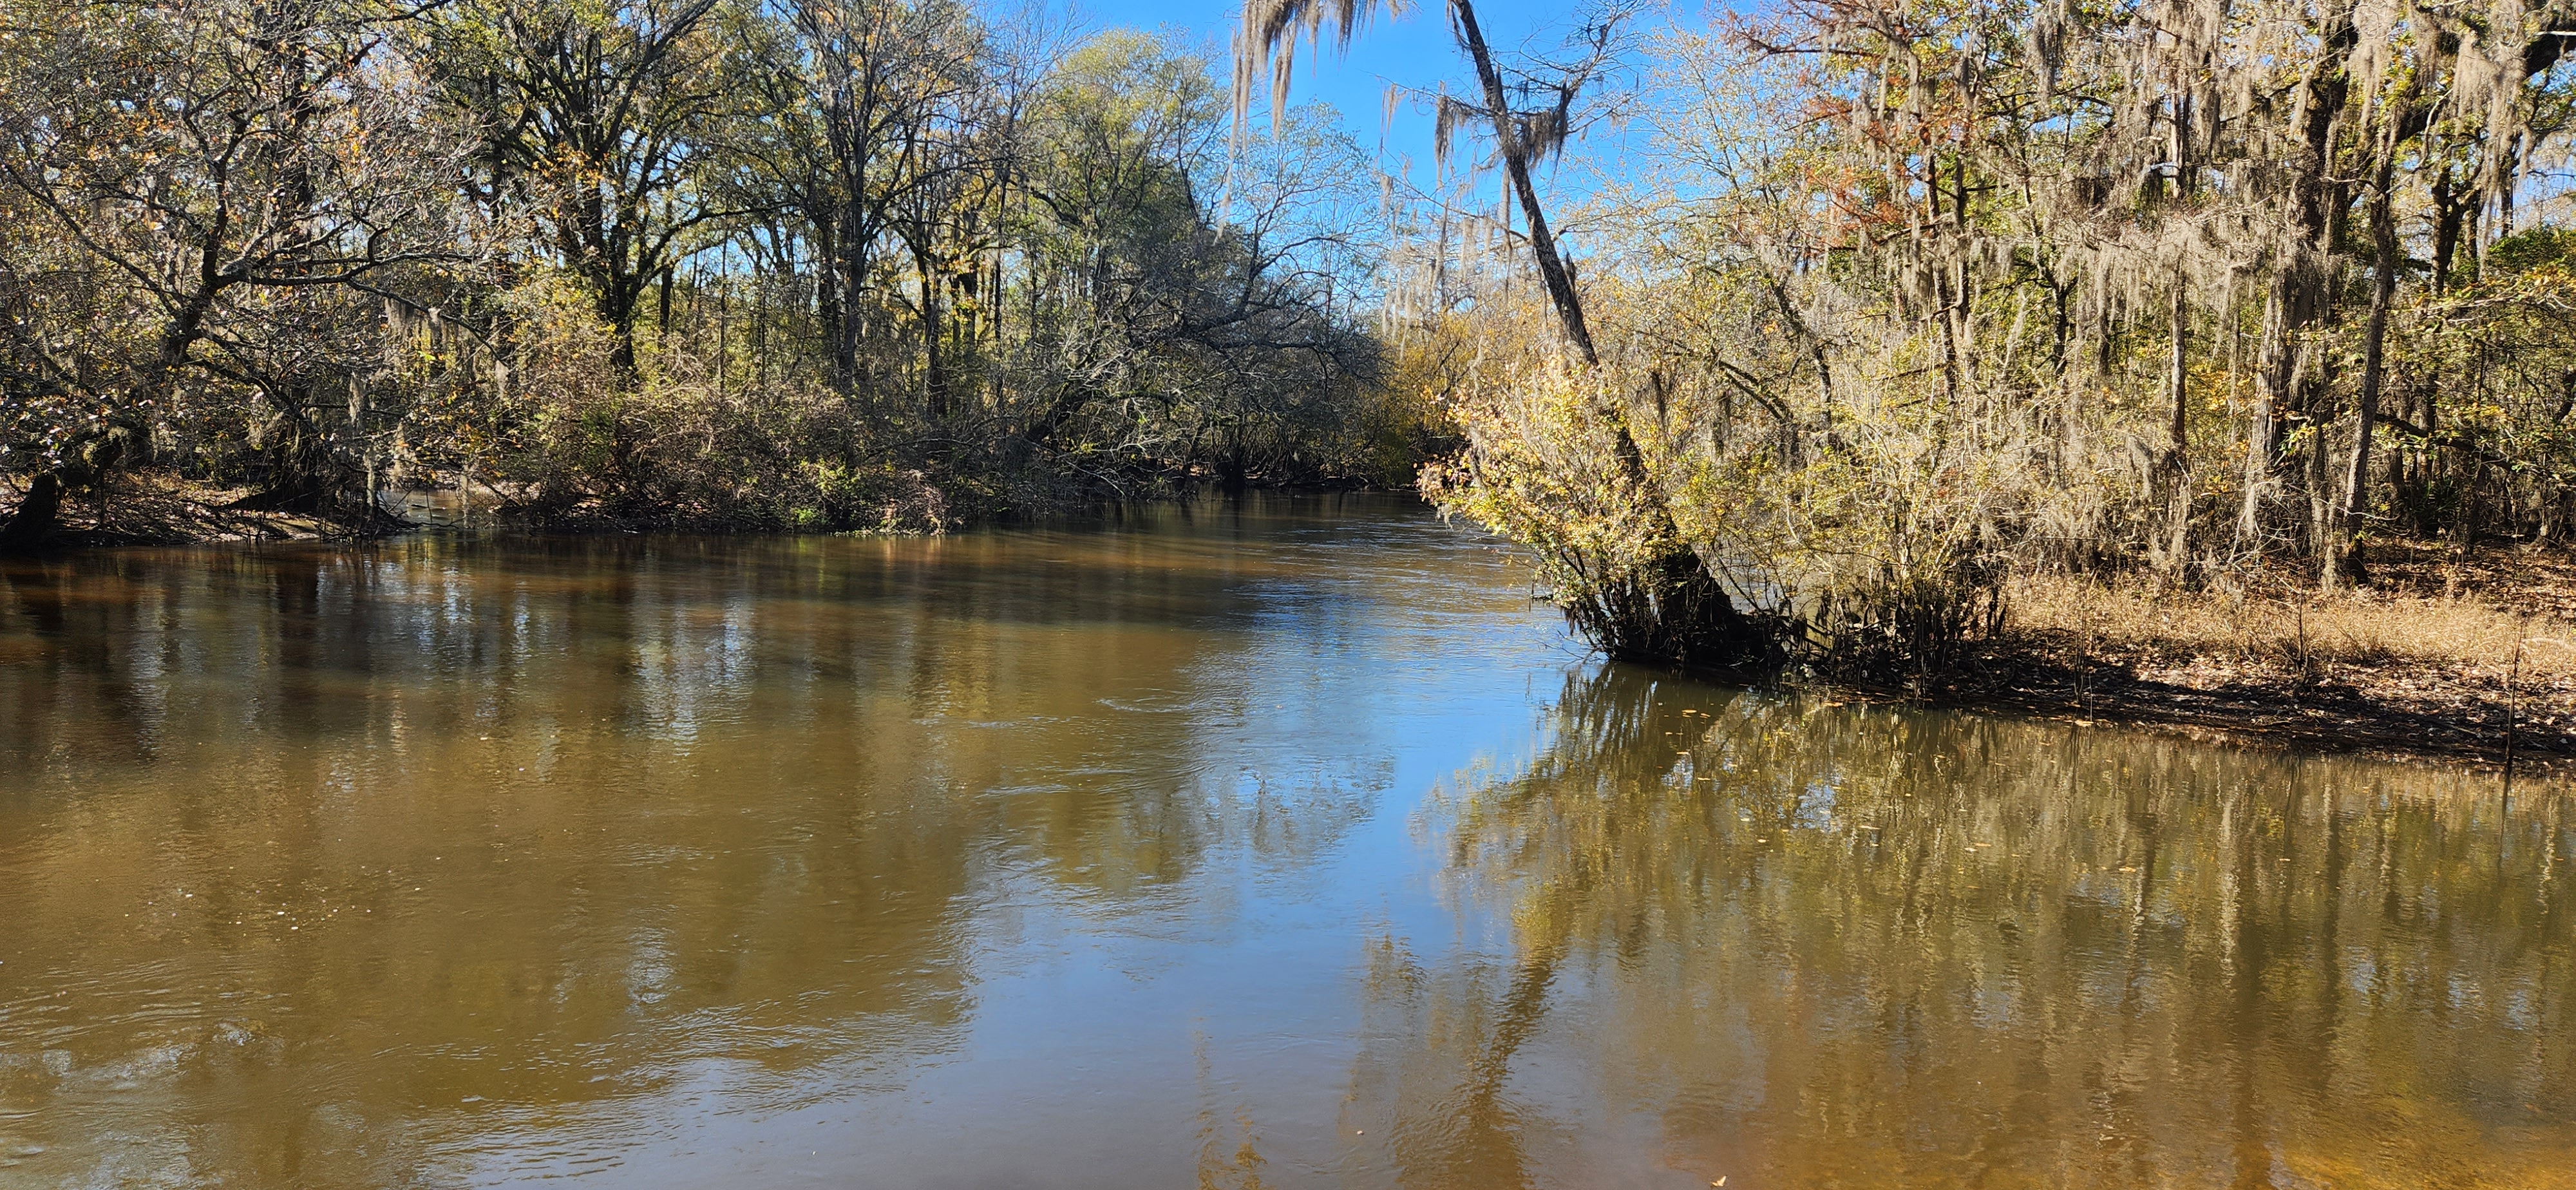 Image of the Ogeechee River mitigation banking area, located in Georgia.